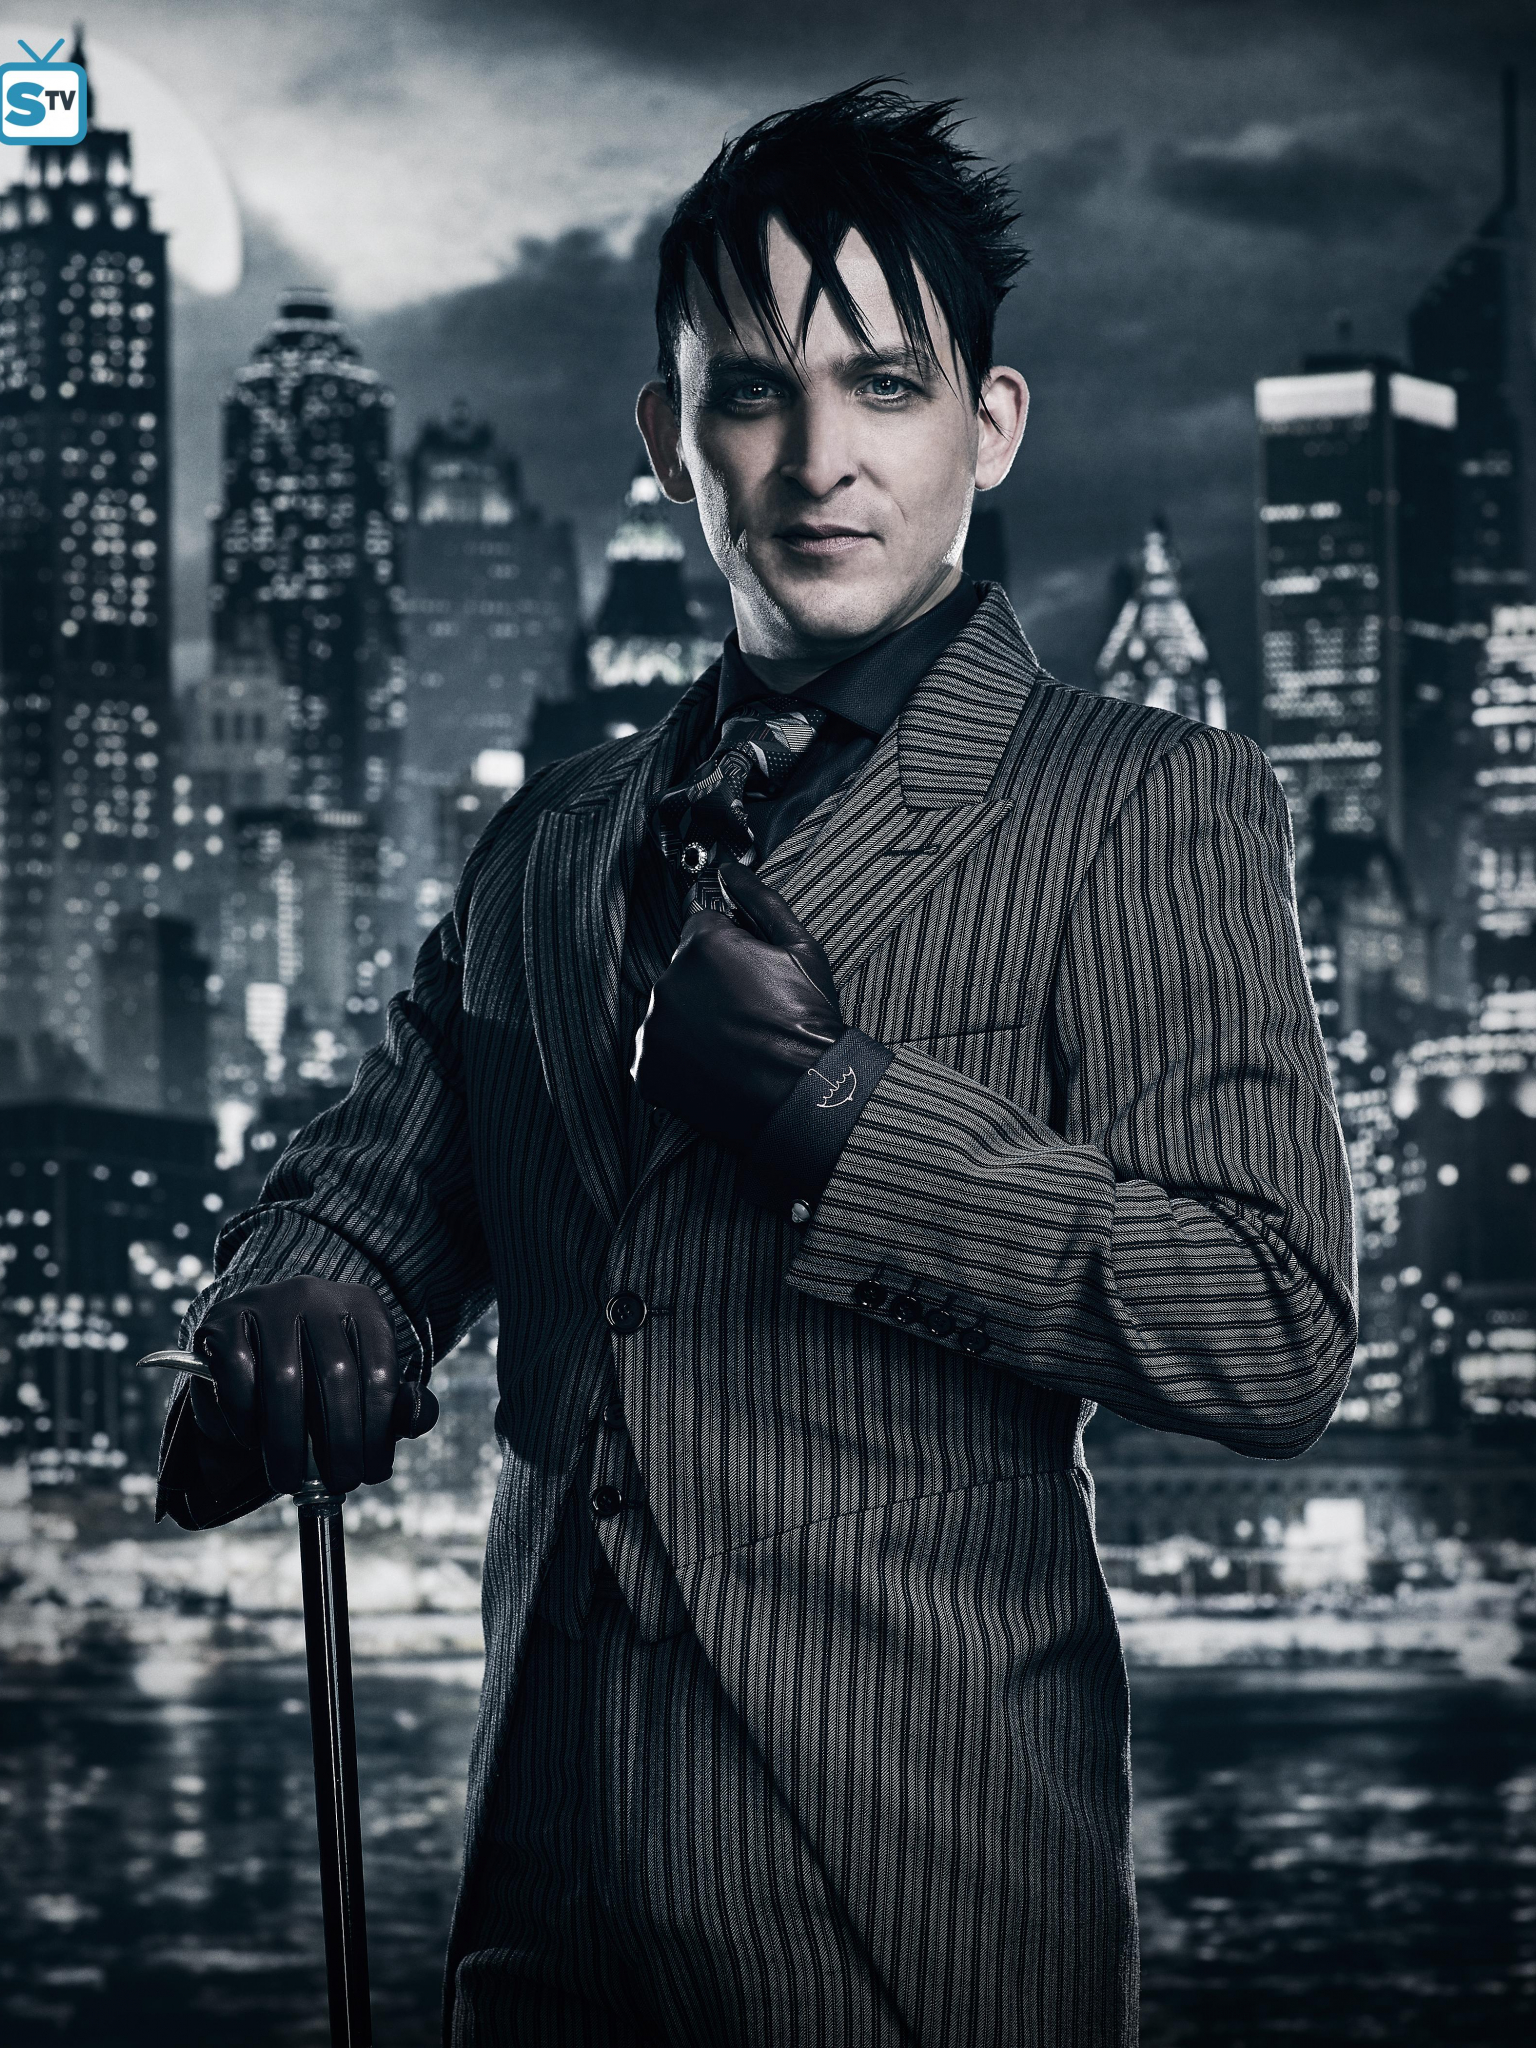 gotham tv series free download for mobile